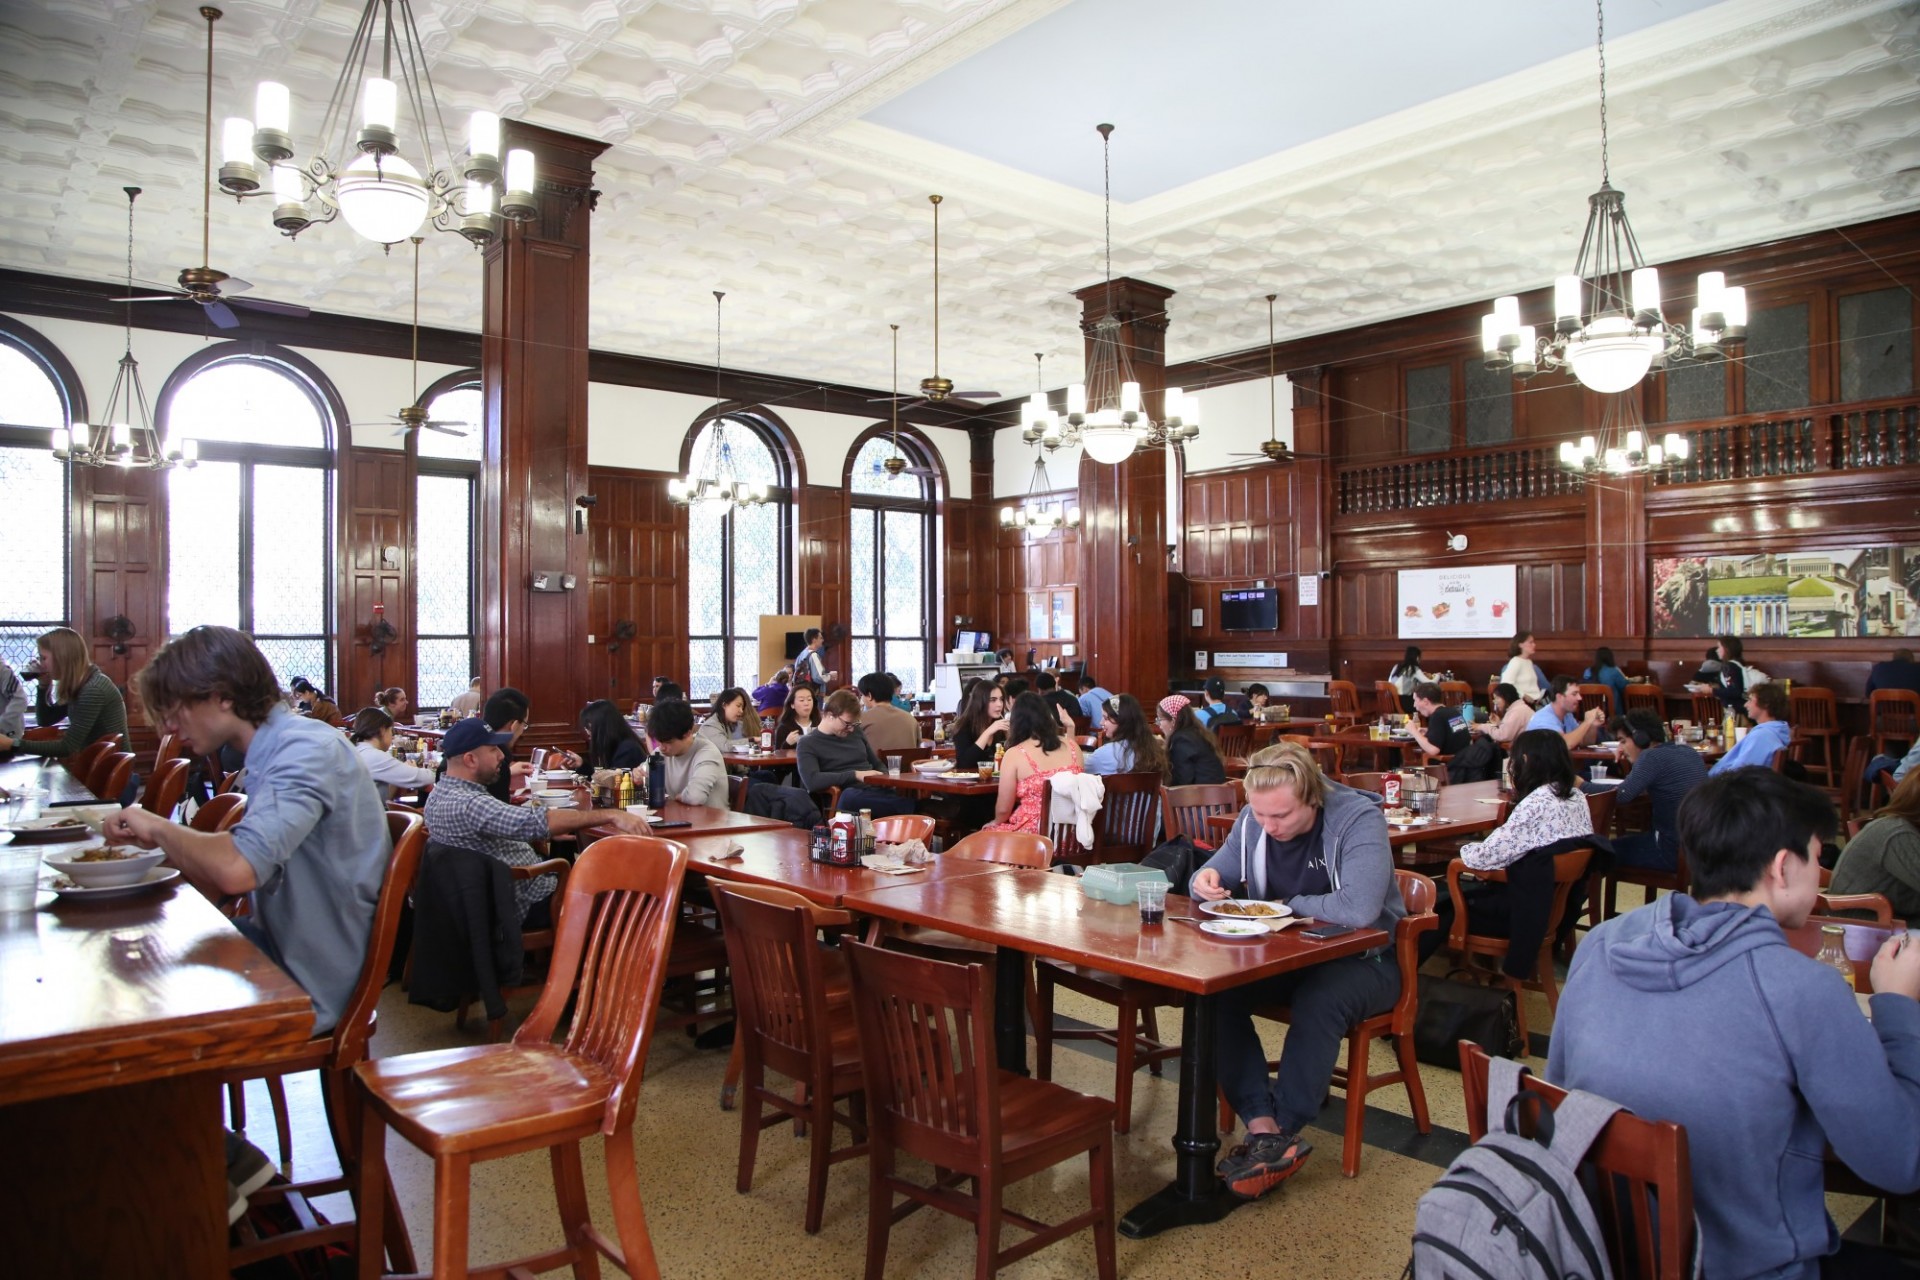 Students eating in John Jay Dining Hall